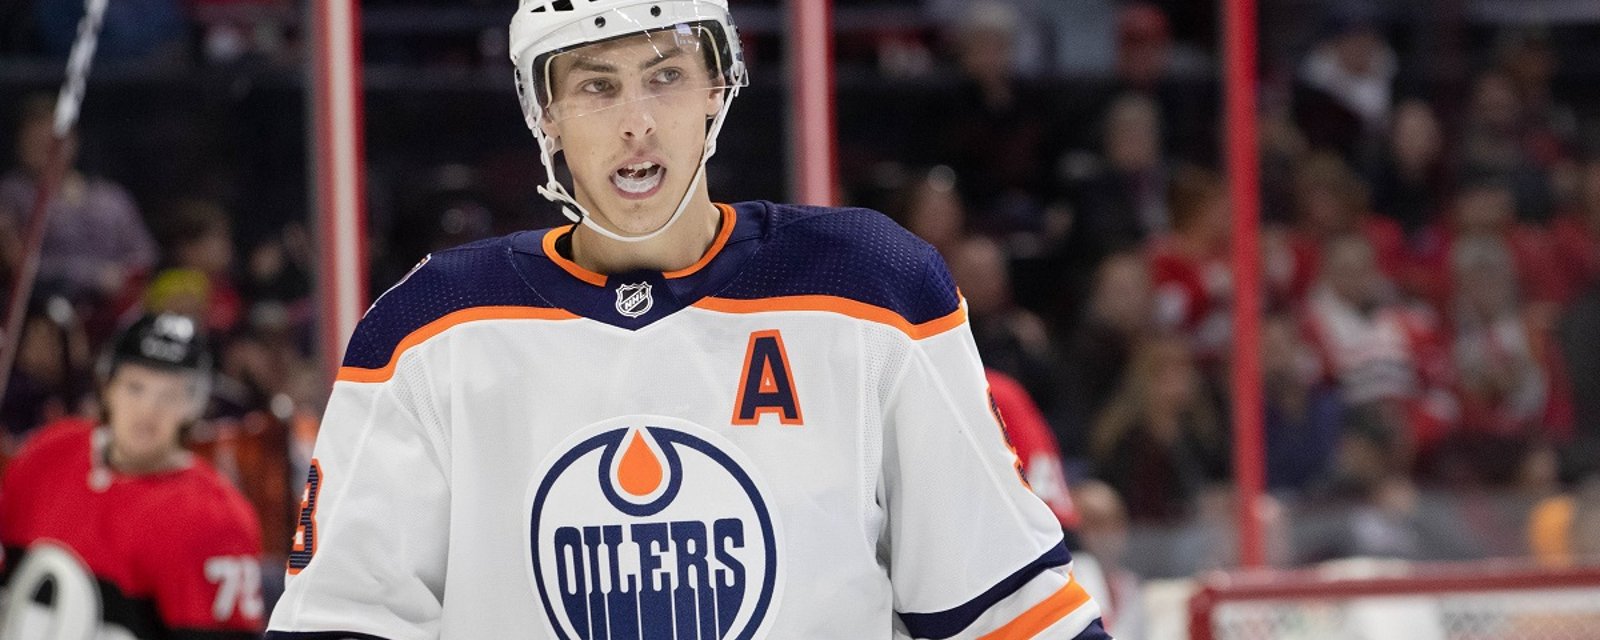 Oilers announce Ryan Nugent-Hopkins has been injured.